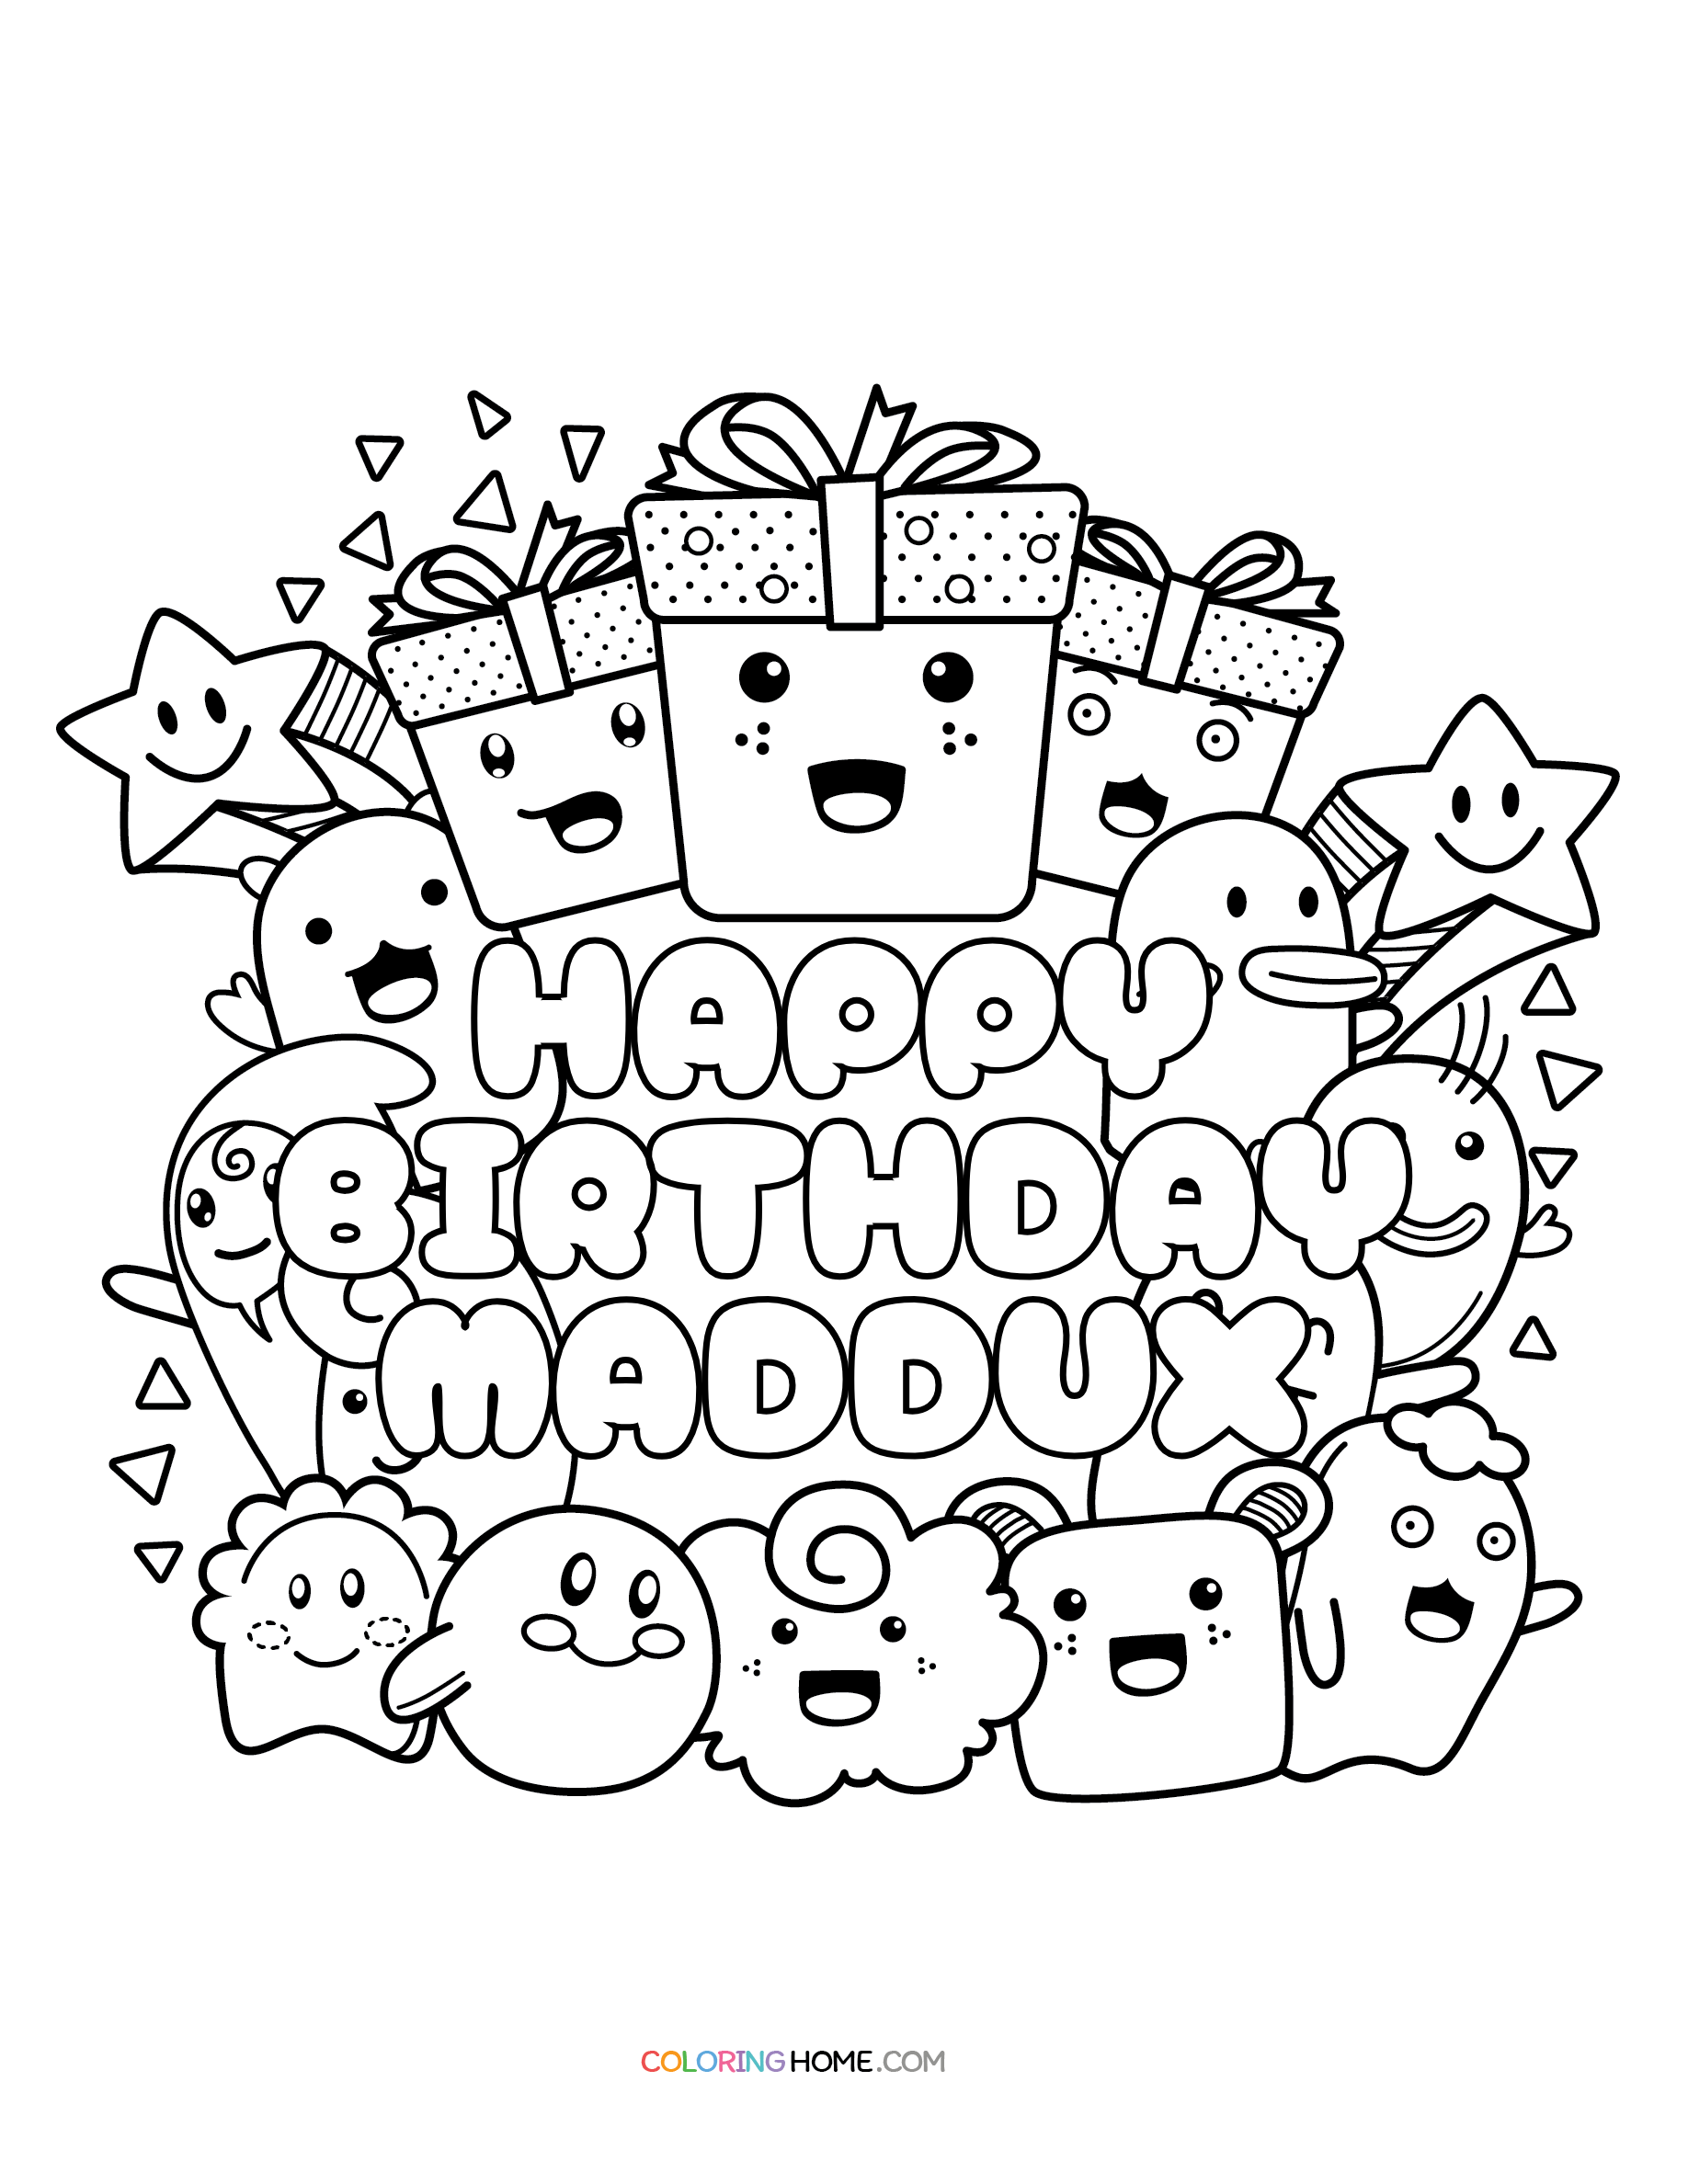 Happy Birthday Maddux coloring page